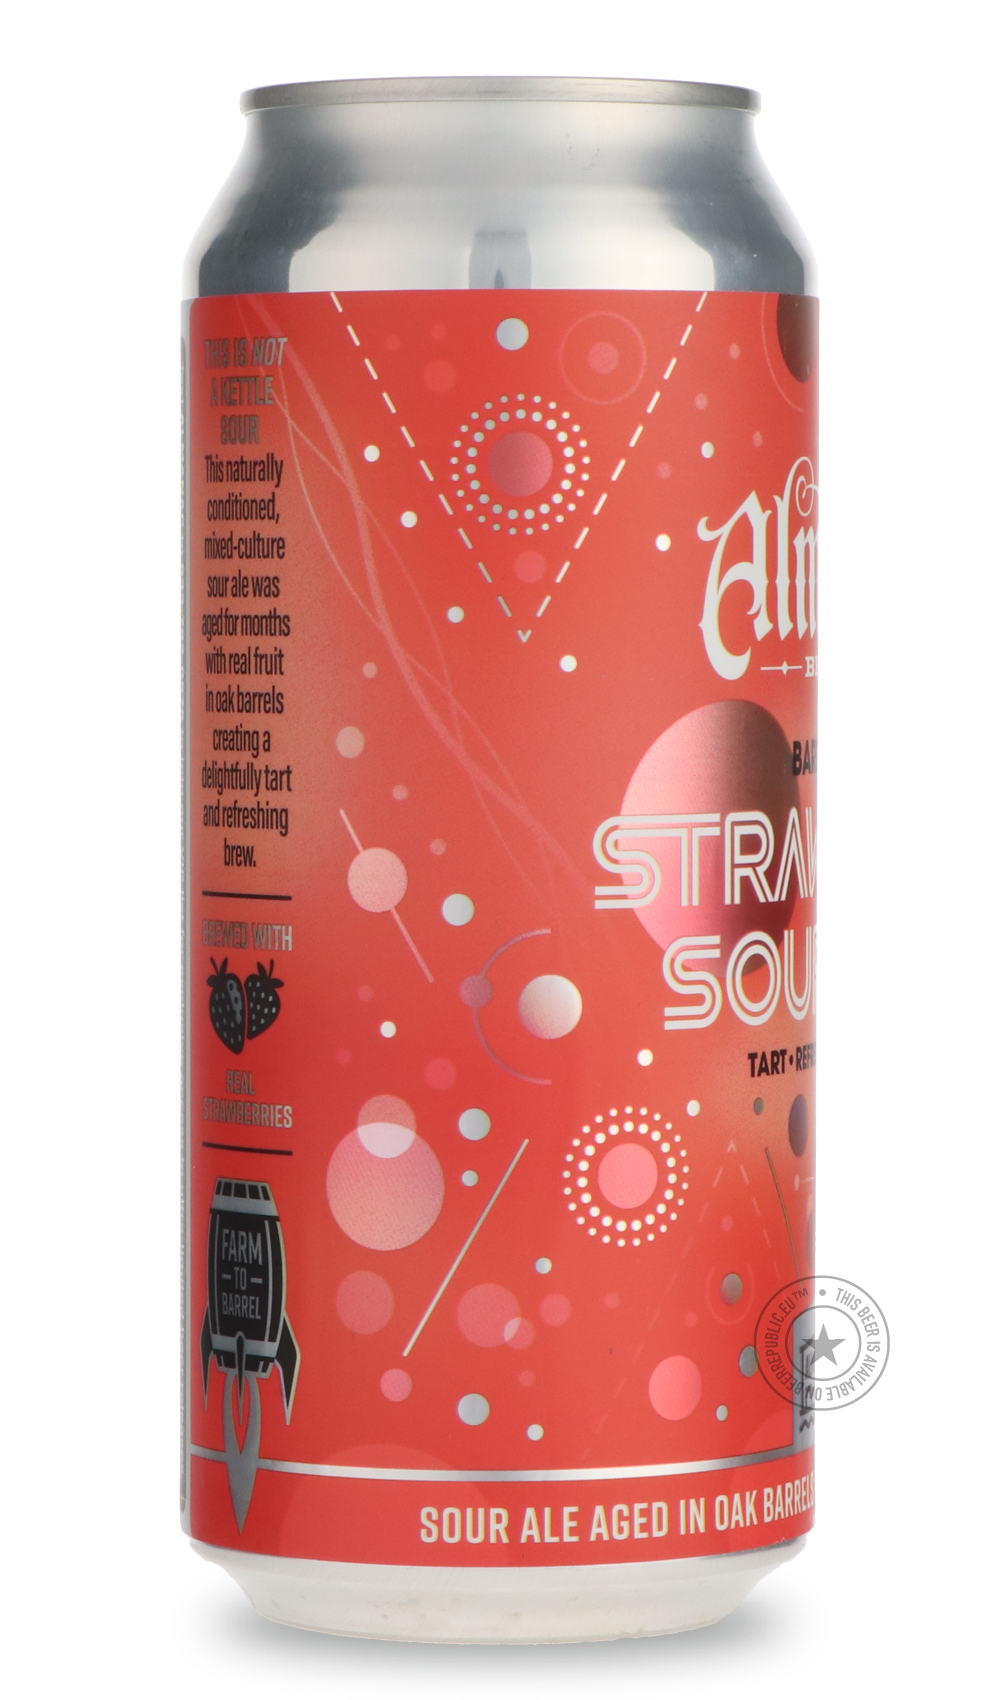 -Almanac- Strawberry Sournova-Sour / Wild & Fruity- Only @ Beer Republic - The best online beer store for American & Canadian craft beer - Buy beer online from the USA and Canada - Bier online kopen - Amerikaans bier kopen - Craft beer store - Craft beer kopen - Amerikanisch bier kaufen - Bier online kaufen - Acheter biere online - IPA - Stout - Porter - New England IPA - Hazy IPA - Imperial Stout - Barrel Aged - Barrel Aged Imperial Stout - Brown - Dark beer - Blond - Blonde - Pilsner - Lager - Wheat - Wei